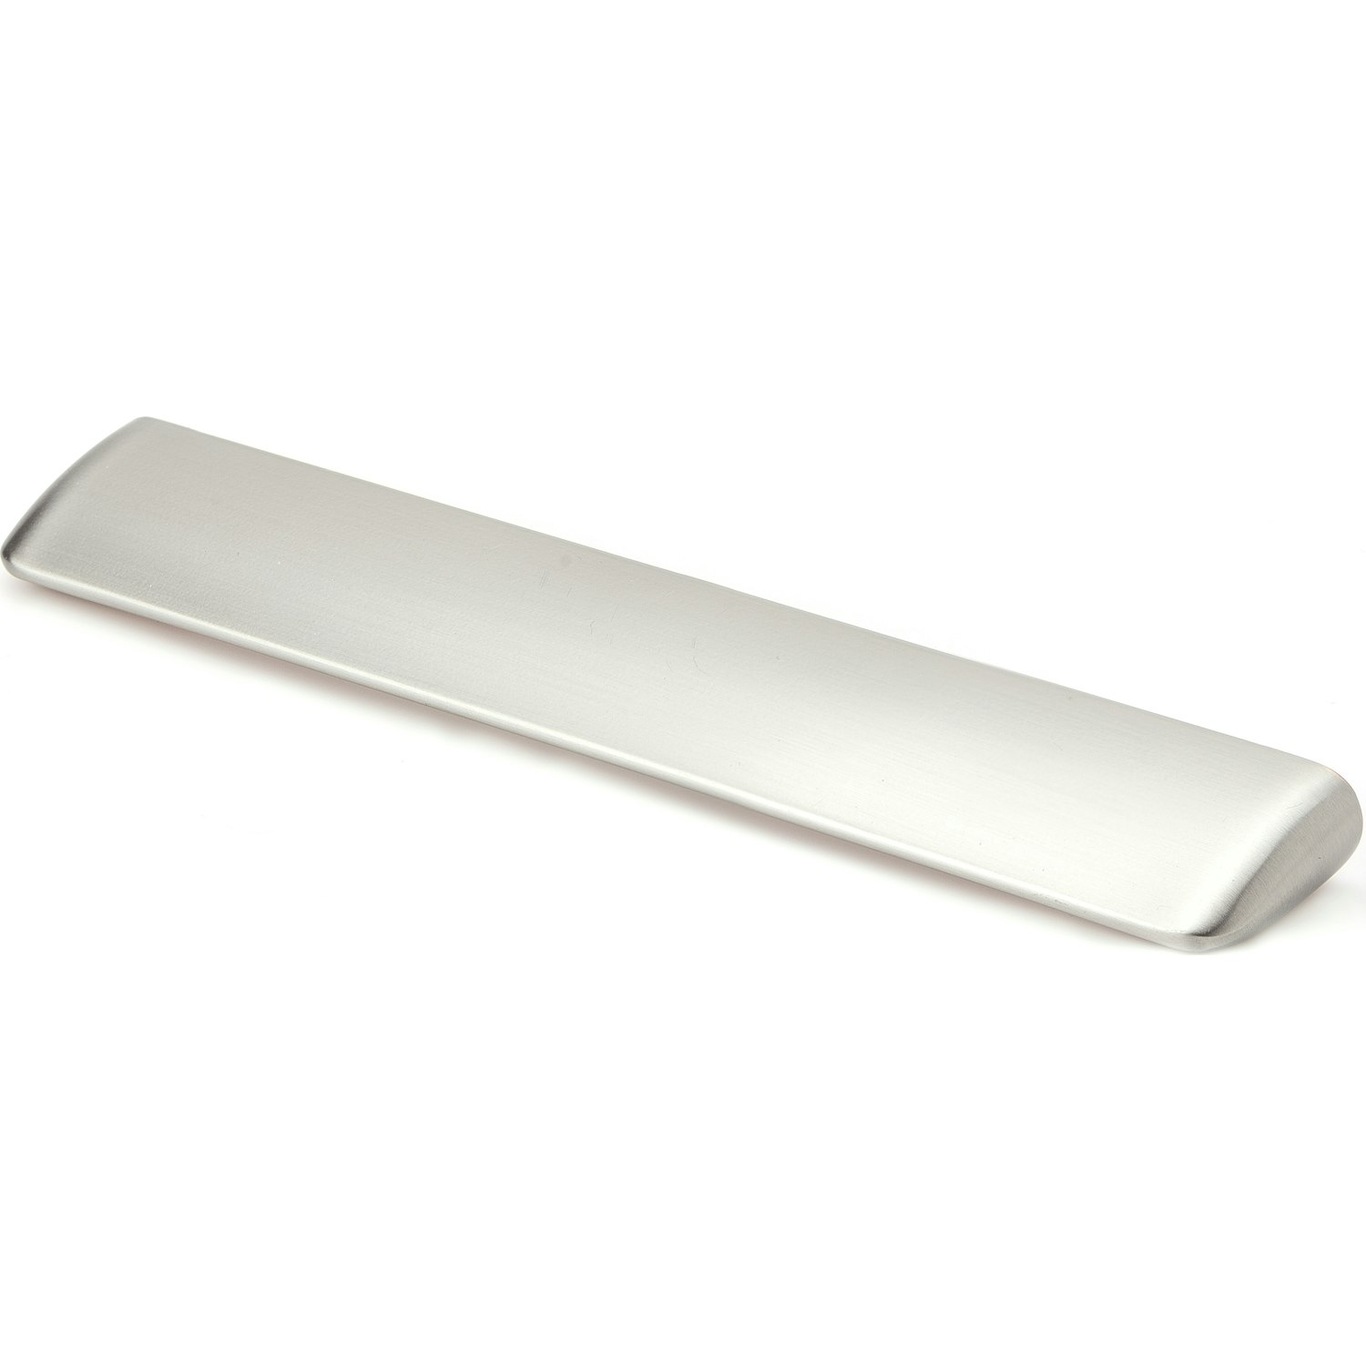 Quiet Handle Stainless Look, CC 160